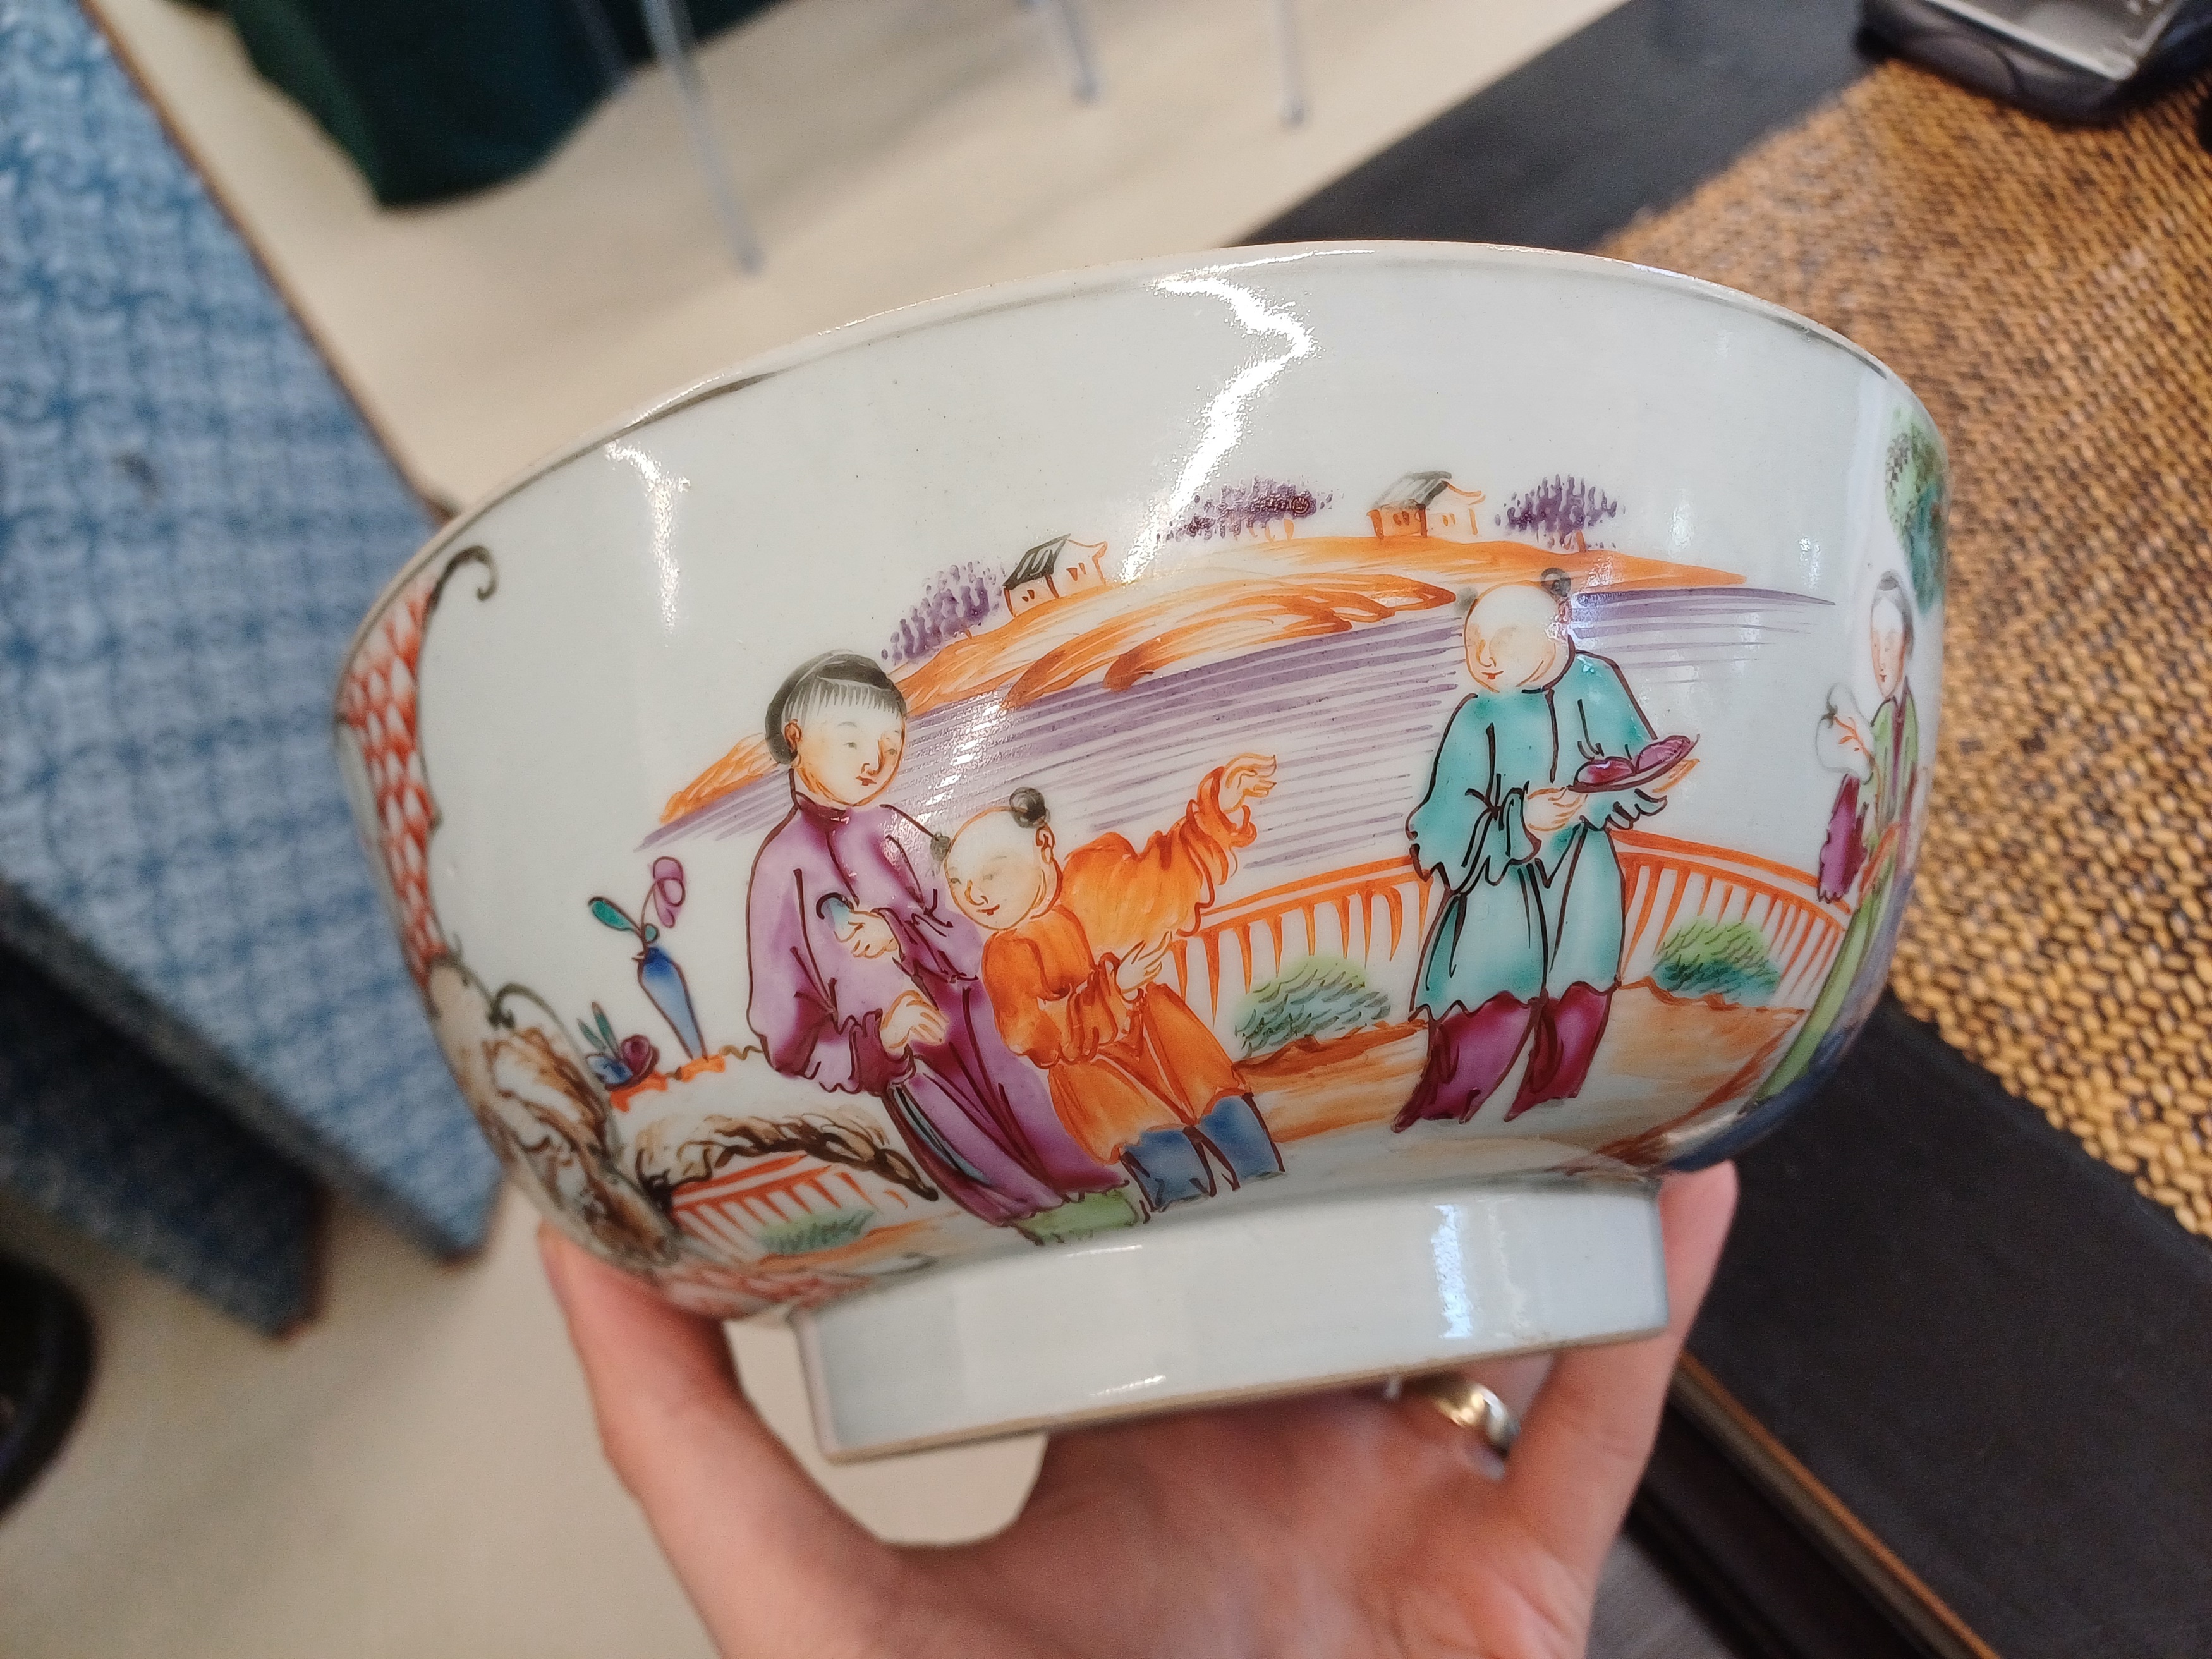 A SMALL CHINESE EXPORT FAMILLE-ROSE 'MANDARIN PALETTE' BOWL 清十八世紀 外銷粉彩人物故事圖紋盌 - Image 4 of 6